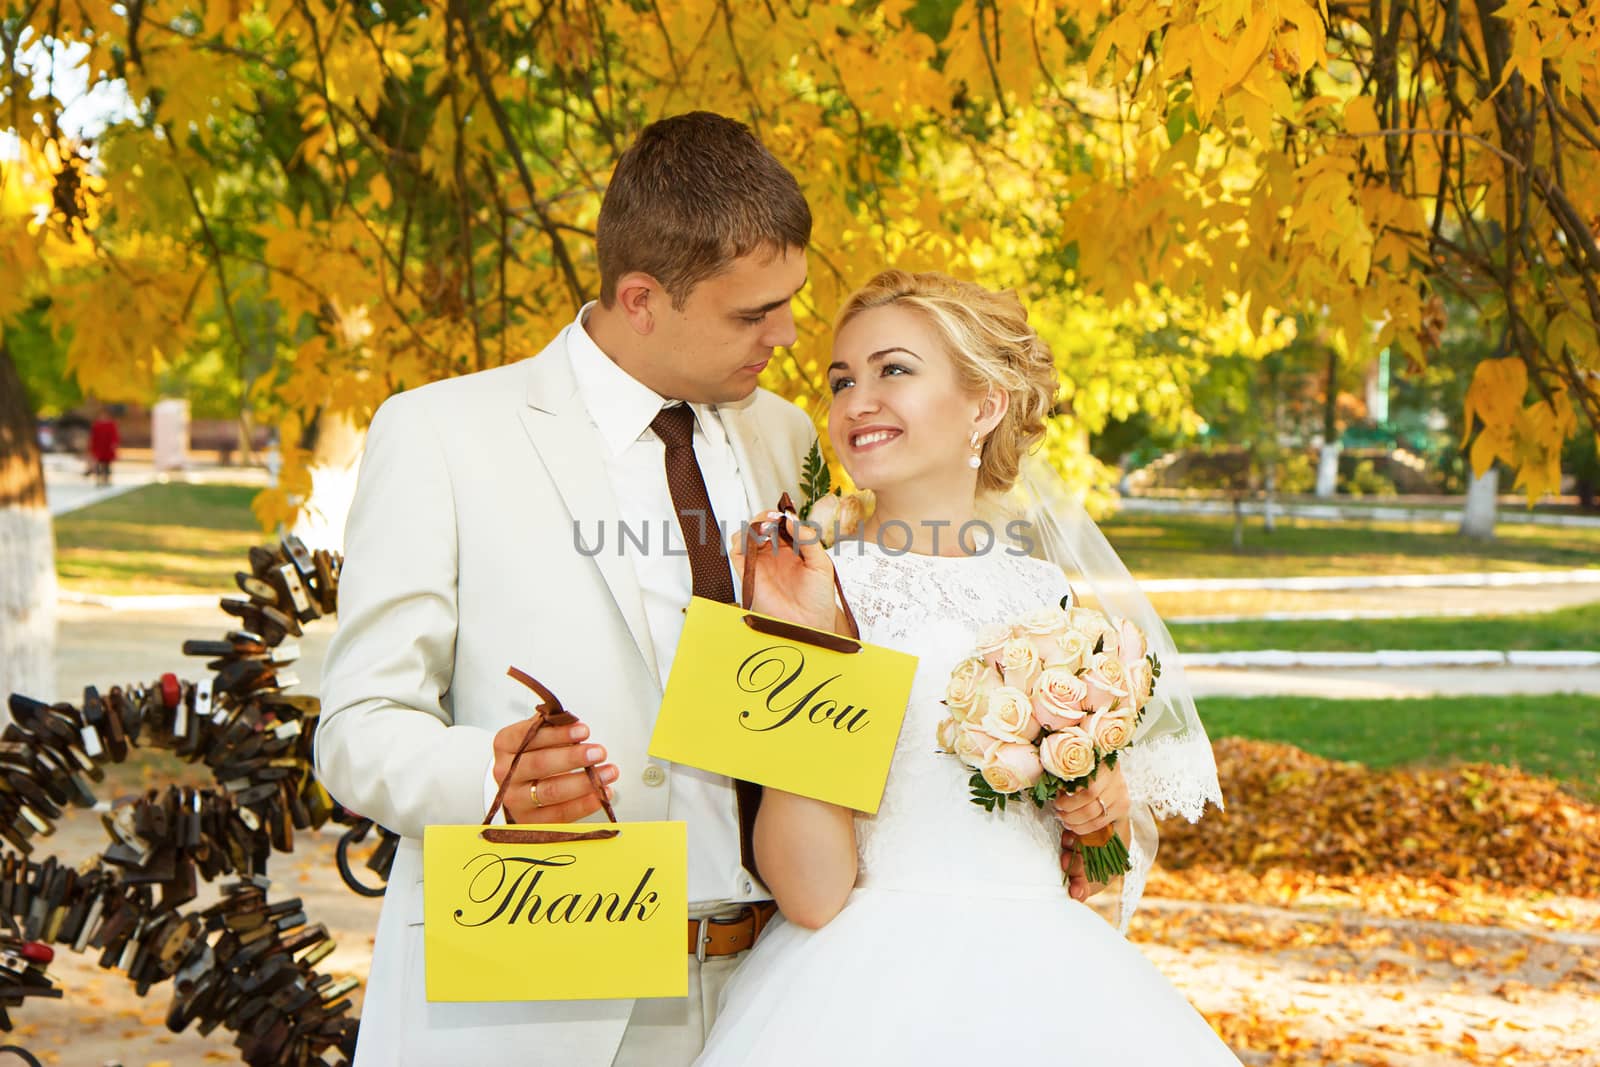 Couple with signs with the words "Thank" and "You" by natazhekova